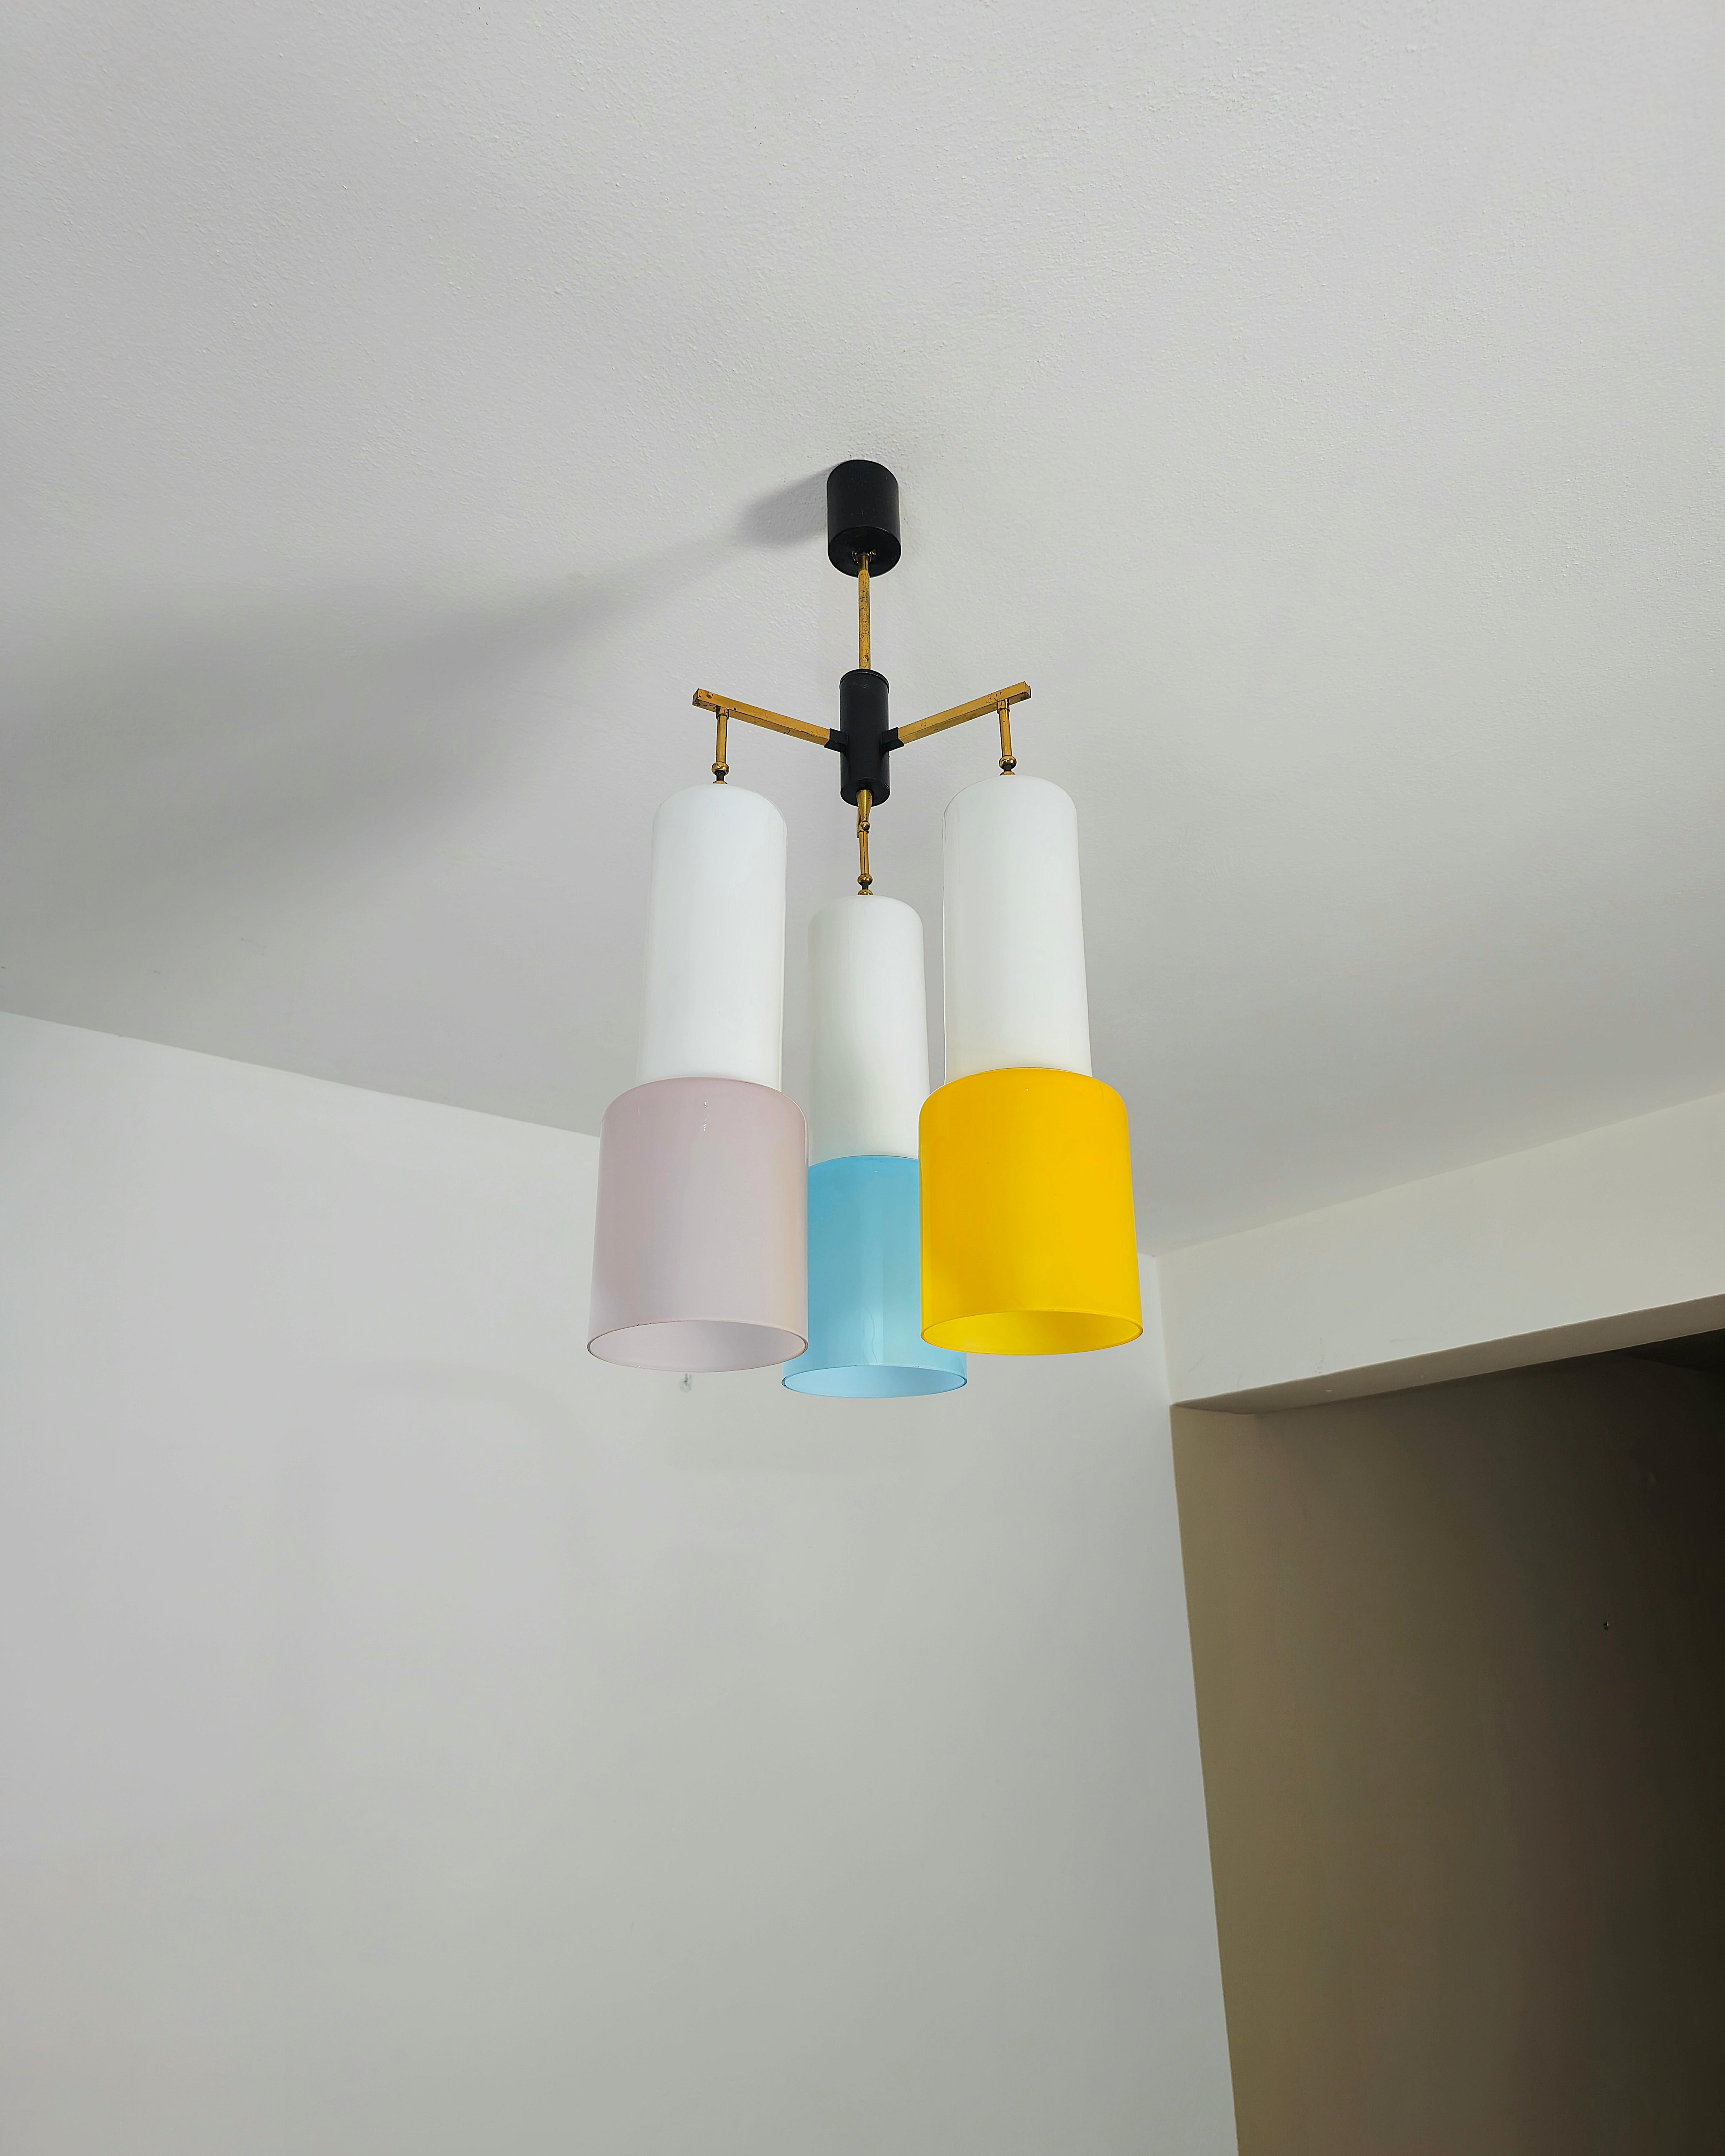 Simpatic 3 lights E27 chandelier attributed to Stilnovo, made with brass structure. Each cylindrical diffuser is in white milky glass with additional milky glass superimposed in shades of wisteria, yellow and light blue. Made in Italy in the